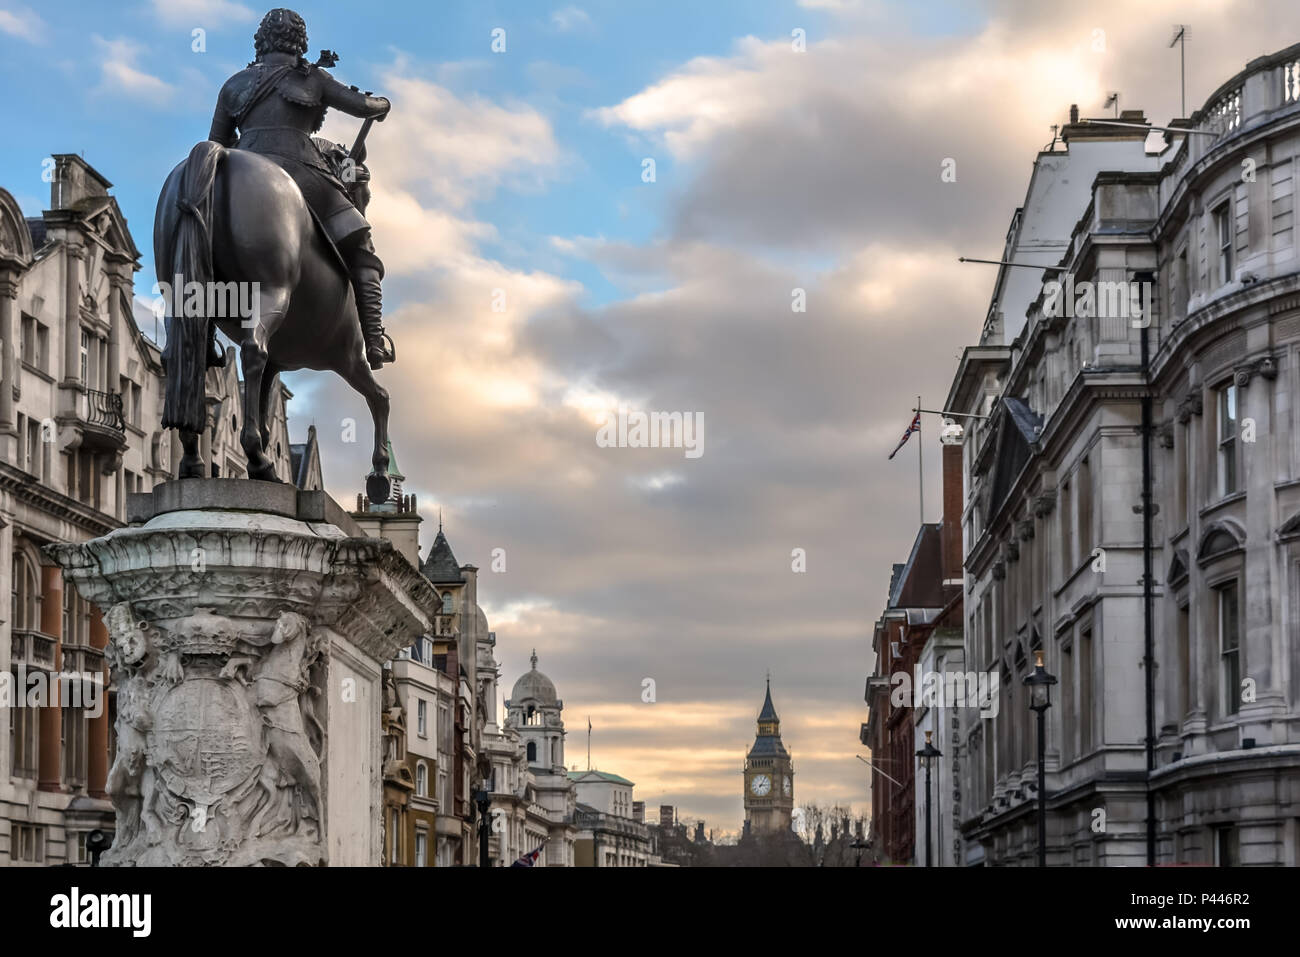 View from Trafalgar Square on the back of the Renaissance-style equestrian statue of Charles I on horseback looking dow Stock Photo